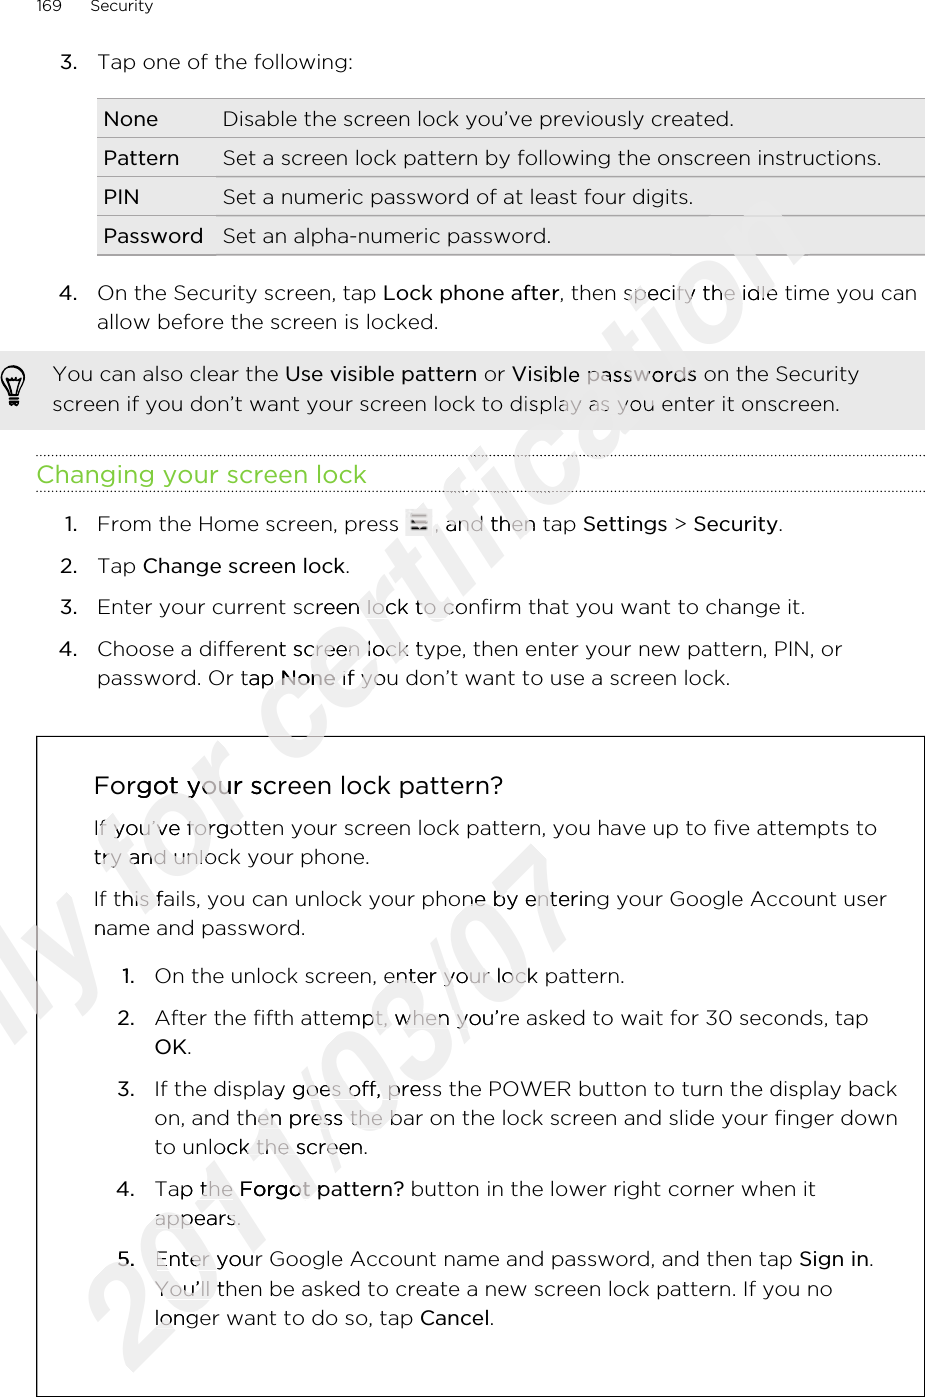 3. Tap one of the following:None Disable the screen lock you’ve previously created.Pattern Set a screen lock pattern by following the onscreen instructions.PIN Set a numeric password of at least four digits.Password Set an alpha-numeric password.4. On the Security screen, tap Lock phone after, then specify the idle time you canallow before the screen is locked. You can also clear the Use visible pattern or Visible passwords on the Securityscreen if you don’t want your screen lock to display as you enter it onscreen.Changing your screen lock1. From the Home screen, press  , and then tap Settings &gt; Security.2. Tap Change screen lock.3. Enter your current screen lock to confirm that you want to change it.4. Choose a different screen lock type, then enter your new pattern, PIN, orpassword. Or tap None if you don’t want to use a screen lock.Forgot your screen lock pattern?If you’ve forgotten your screen lock pattern, you have up to five attempts totry and unlock your phone.If this fails, you can unlock your phone by entering your Google Account username and password.1. On the unlock screen, enter your lock pattern.2. After the fifth attempt, when you’re asked to wait for 30 seconds, tapOK.3. If the display goes off, press the POWER button to turn the display backon, and then press the bar on the lock screen and slide your finger downto unlock the screen.4. Tap the Forgot pattern? button in the lower right corner when itappears.5. Enter your Google Account name and password, and then tap Sign in.You’ll then be asked to create a new screen lock pattern. If you nolonger want to do so, tap Cancel.169 SecurityOnly name and password.Only name and password.1.Only 1.Only Only for Forgot your screen lock pattern?for Forgot your screen lock pattern?If you’ve forgotten your screen lock pattern, you have up to five attempts tofor If you’ve forgotten your screen lock pattern, you have up to five attempts totry and unlock your phone.for try and unlock your phone.If this fails, you can unlock your phone by entering your Google Account userfor If this fails, you can unlock your phone by entering your Google Account userfor certification certification certification certification , then specify the idle time you cancertification , then specify the idle time you cancertification Visible passwordscertification Visible passwordsscreen if you don’t want your screen lock to display as you enter it onscreen.certification screen if you don’t want your screen lock to display as you enter it onscreen.certification certification certification From the Home screen, press certification From the Home screen, press certification , and then tap certification , and then tap Enter your current screen lock to confirm that you want to change it.certification Enter your current screen lock to confirm that you want to change it.Choose a different screen lock type, then enter your new pattern, PIN, orcertification Choose a different screen lock type, then enter your new pattern, PIN, orpassword. Or tap certification password. Or tap Nonecertification None if you don’t want to use a screen lock.certification  if you don’t want to use a screen lock.certification certification 2011/03/07If this fails, you can unlock your phone by entering your Google Account user2011/03/07If this fails, you can unlock your phone by entering your Google Account userOn the unlock screen, enter your lock pattern.2011/03/07On the unlock screen, enter your lock pattern.2011/03/07After the fifth attempt, when you’re asked to wait for 30 seconds, tap2011/03/07After the fifth attempt, when you’re asked to wait for 30 seconds, tapIf the display goes off, press the POWER button to turn the display back2011/03/07If the display goes off, press the POWER button to turn the display backon, and then press the bar on the lock screen and slide your finger down2011/03/07on, and then press the bar on the lock screen and slide your finger downto unlock the screen.2011/03/07to unlock the screen.Tap the 2011/03/07Tap the Forgot pattern?2011/03/07Forgot pattern?appears.2011/03/07appears.5.2011/03/075.Enter your Google Account name and password, and then tap 2011/03/07Enter your Google Account name and password, and then tap You’ll then be asked to create a new screen lock pattern. If you no2011/03/07You’ll then be asked to create a new screen lock pattern. If you nolonger want to do so, tap 2011/03/07longer want to do so, tap 